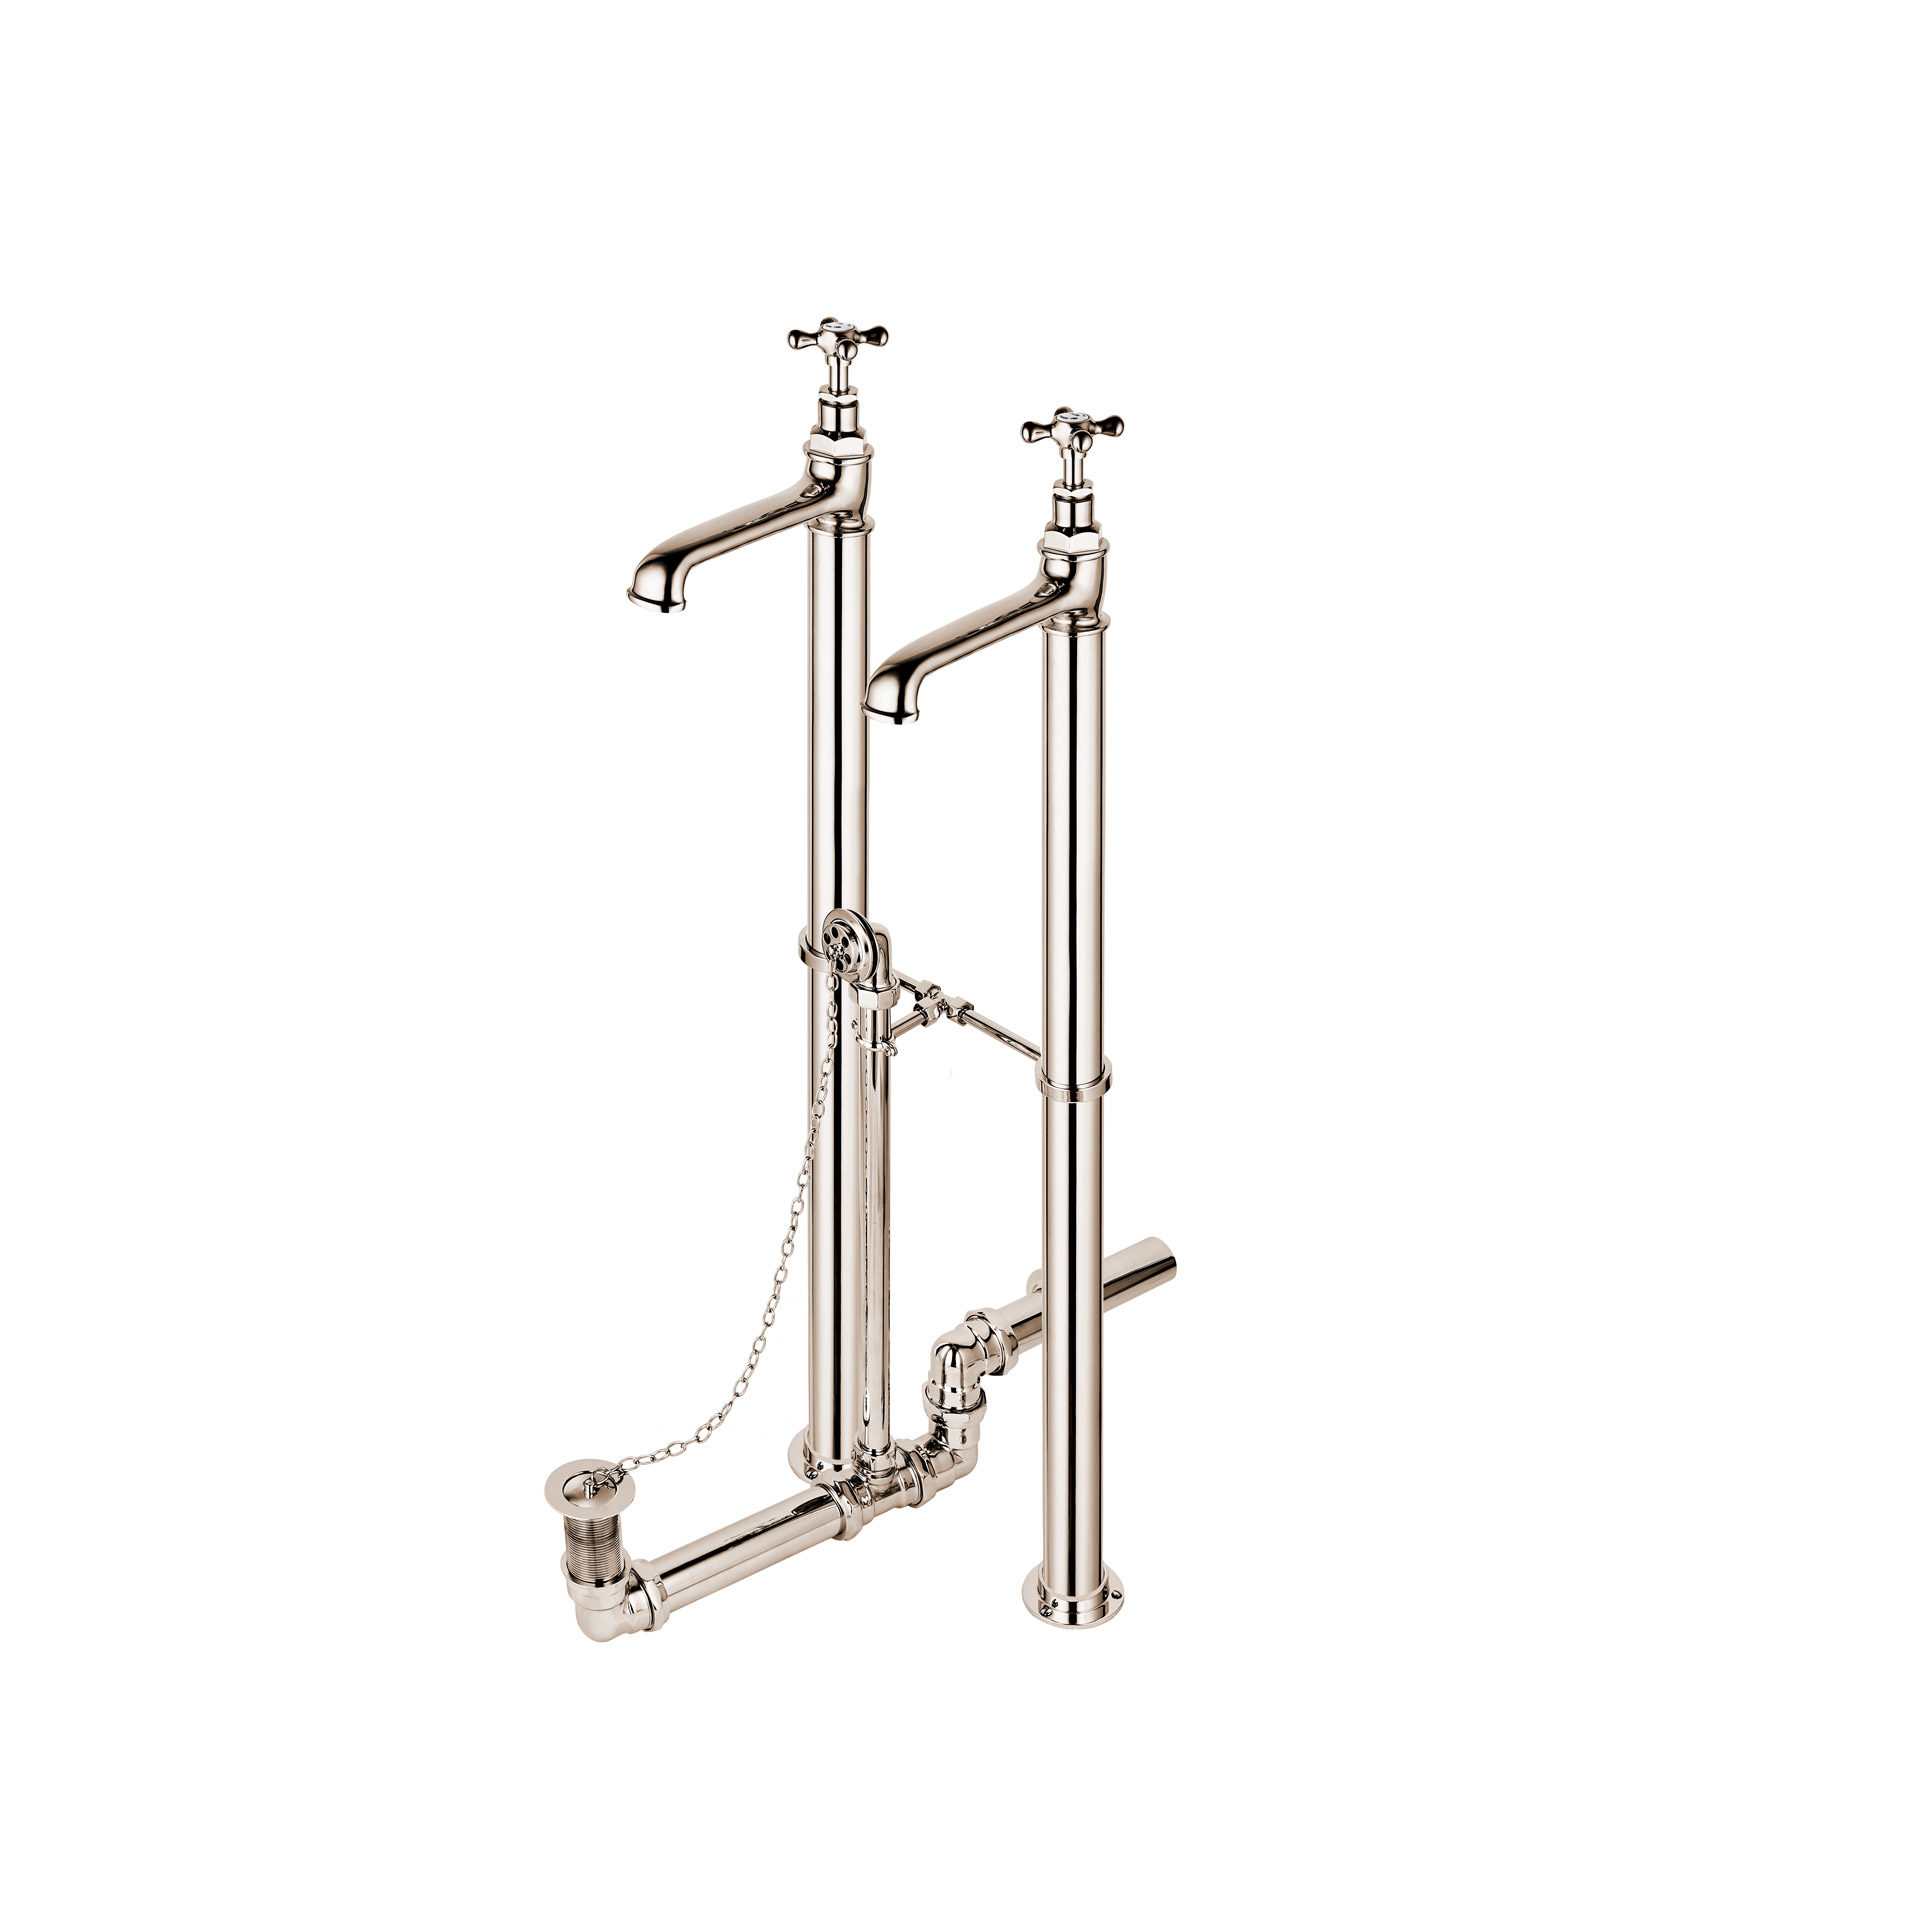 Floor Mounted Bath Taps with 2″ Floor Stands, Bracing Kit, Chain, Plug and Waste Setup